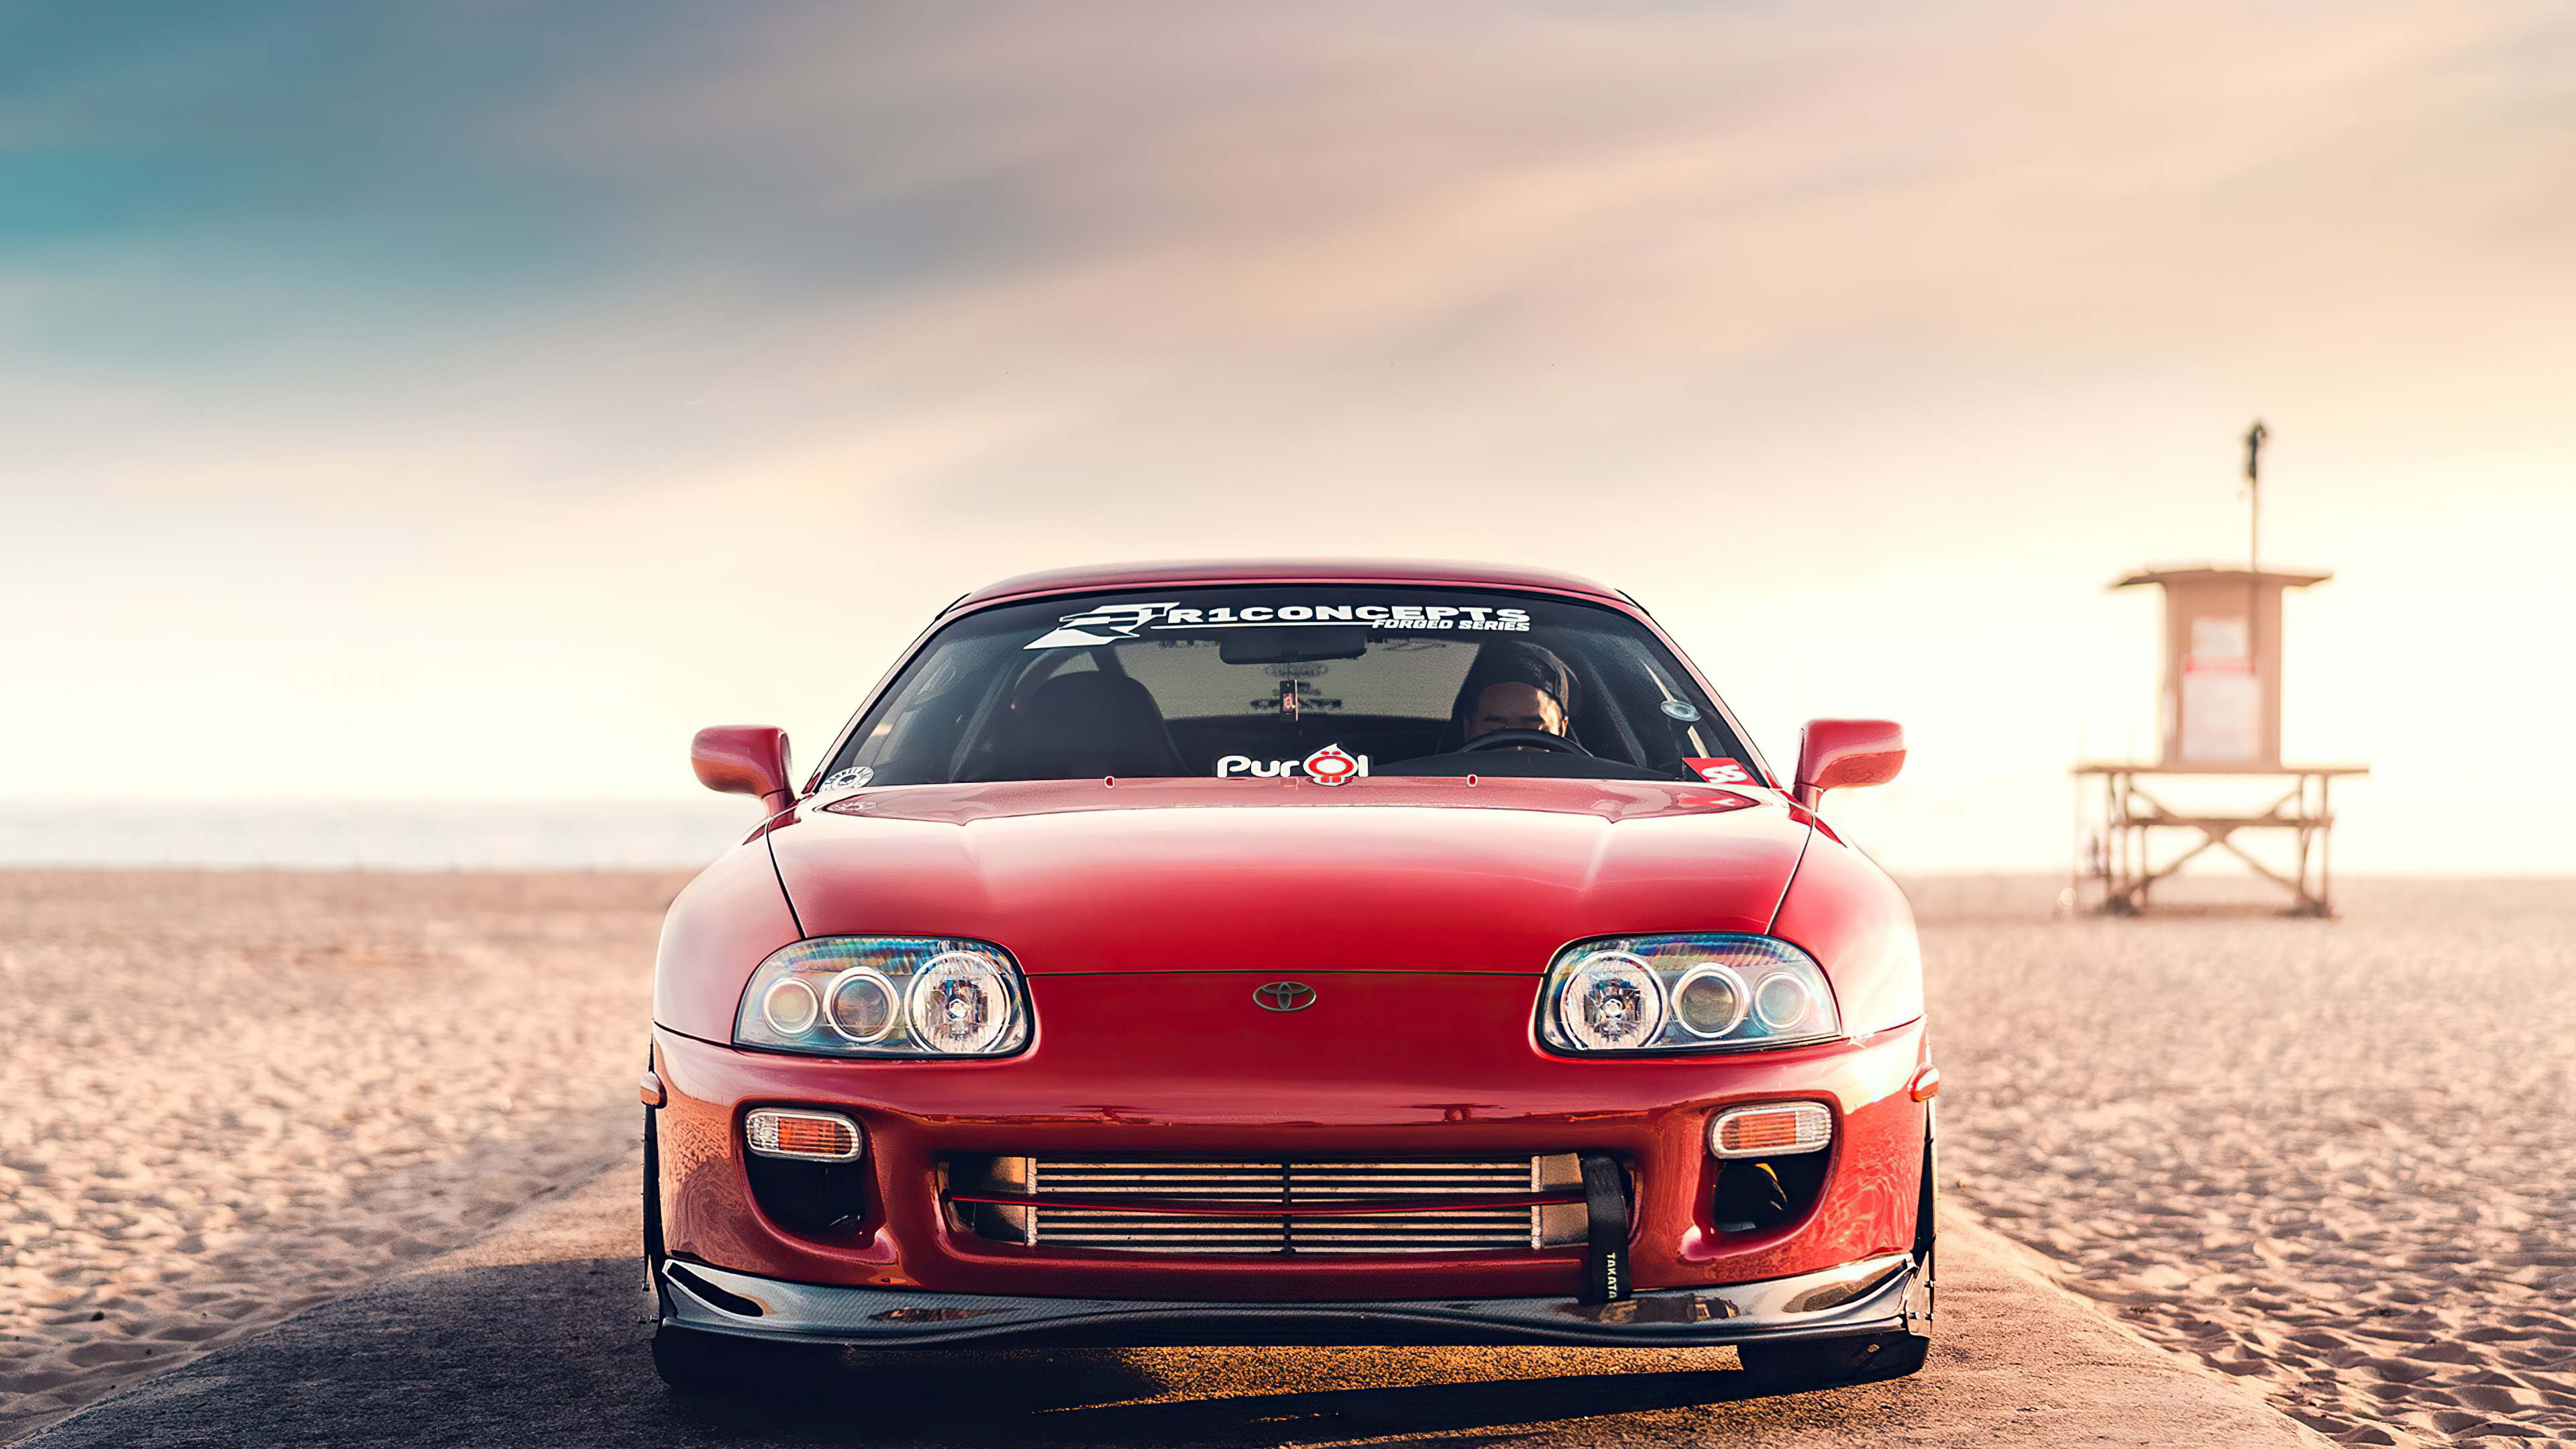 X toyota supra old k k hd k wallpapers images backgrounds photos and pictures